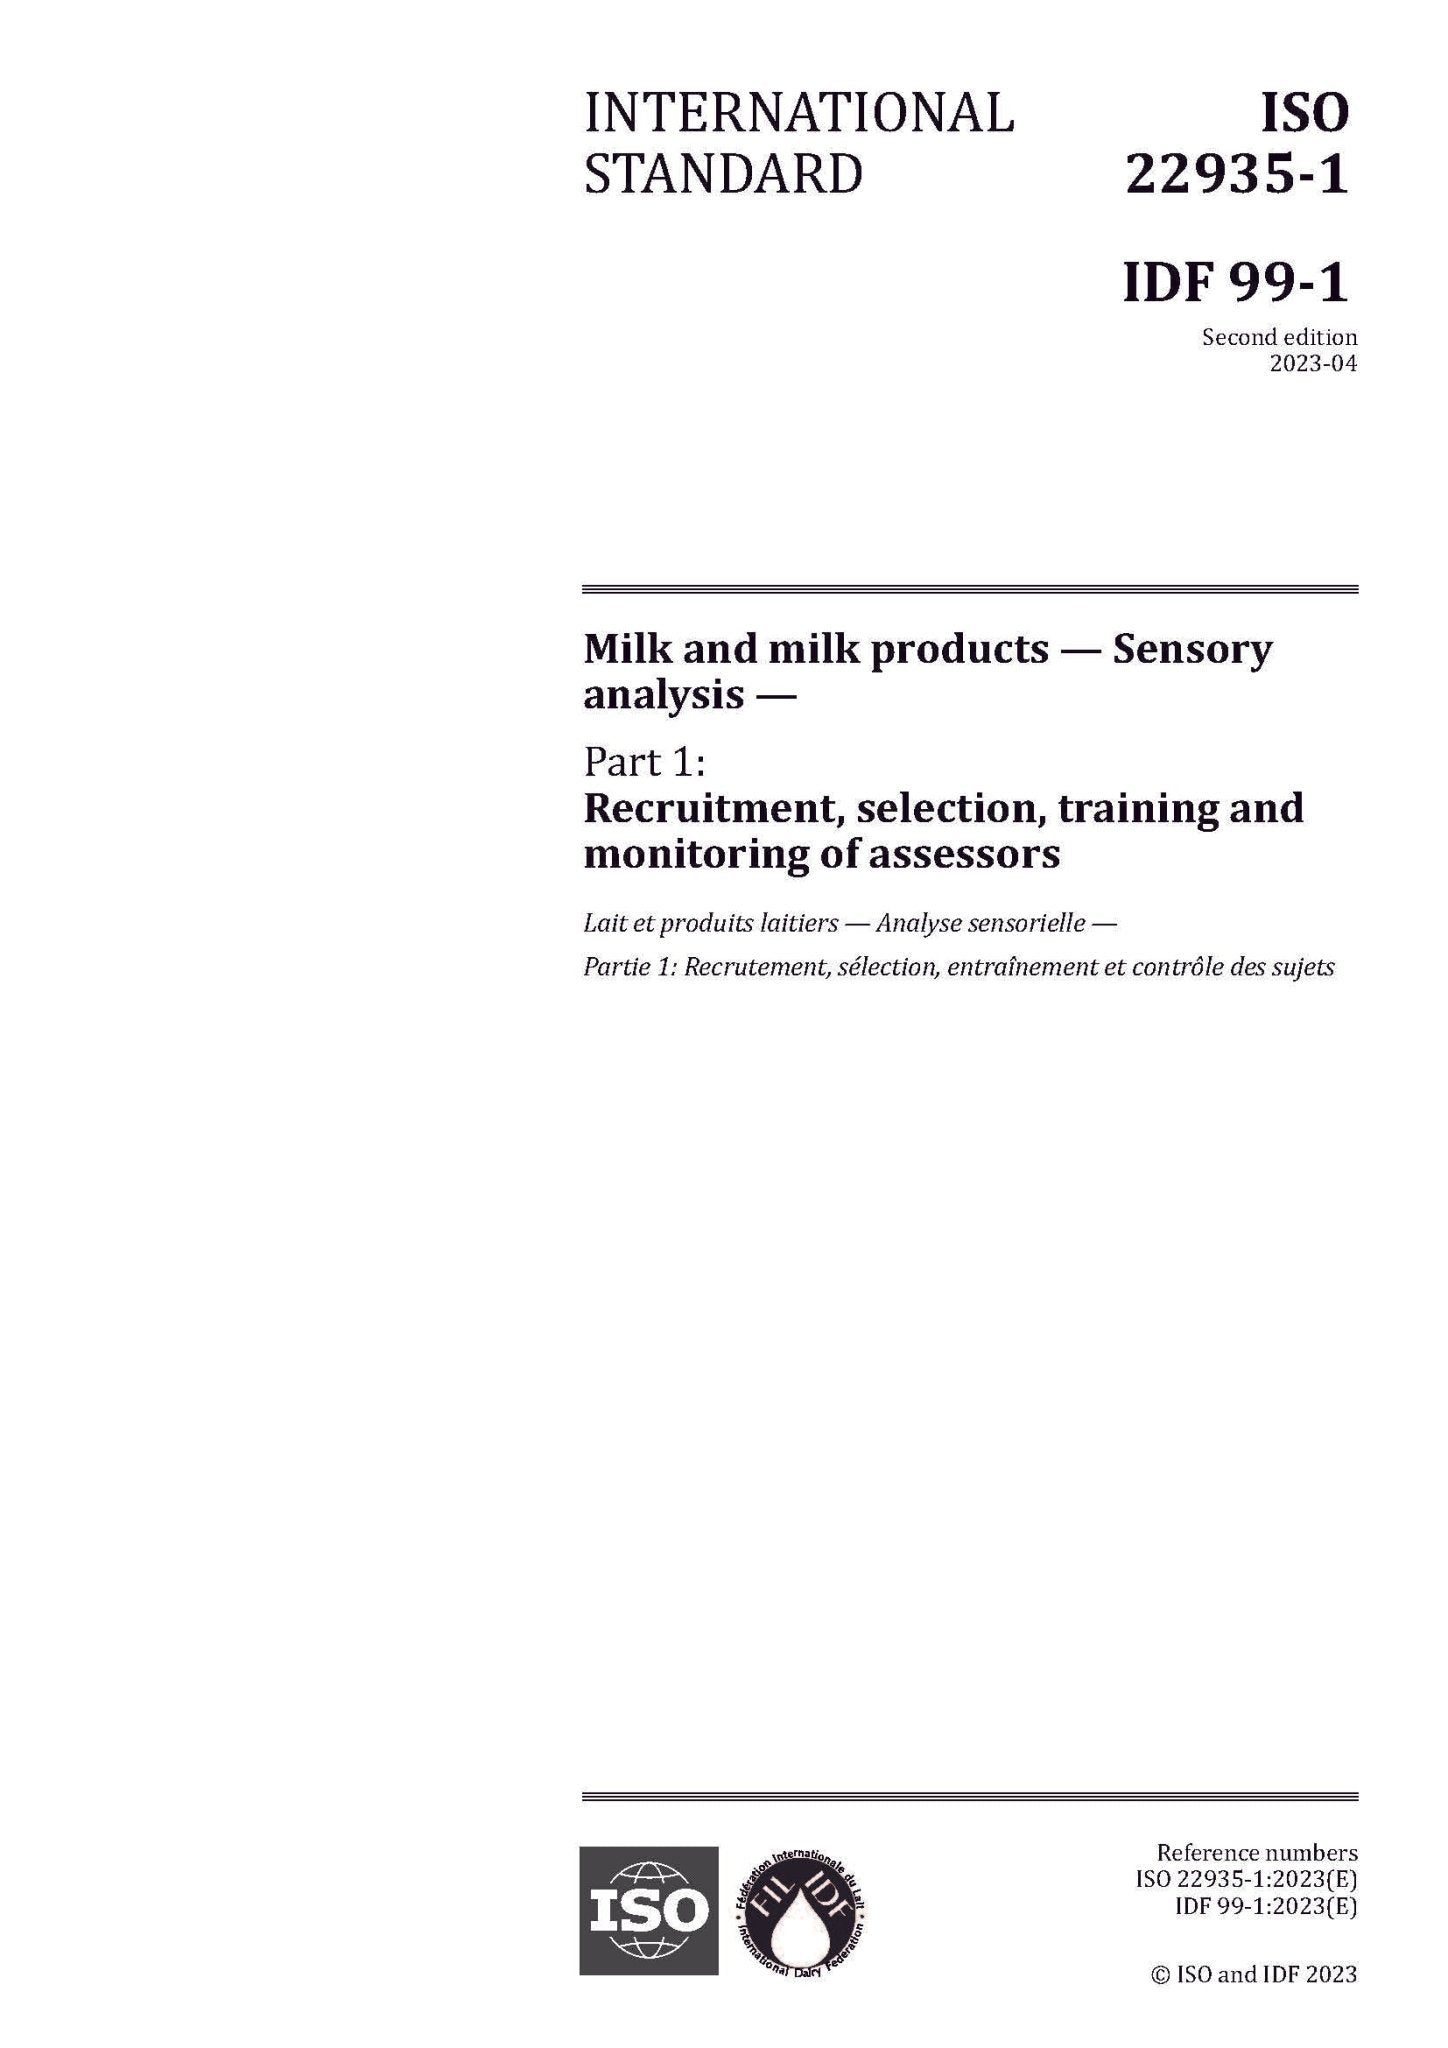 ISO 22935-1 | IDF 99-1: 2023 - Milk and milk products — Sensory analysis — Part 1: Recruitment, selection, training and monitoring of assessors - FIL-IDF